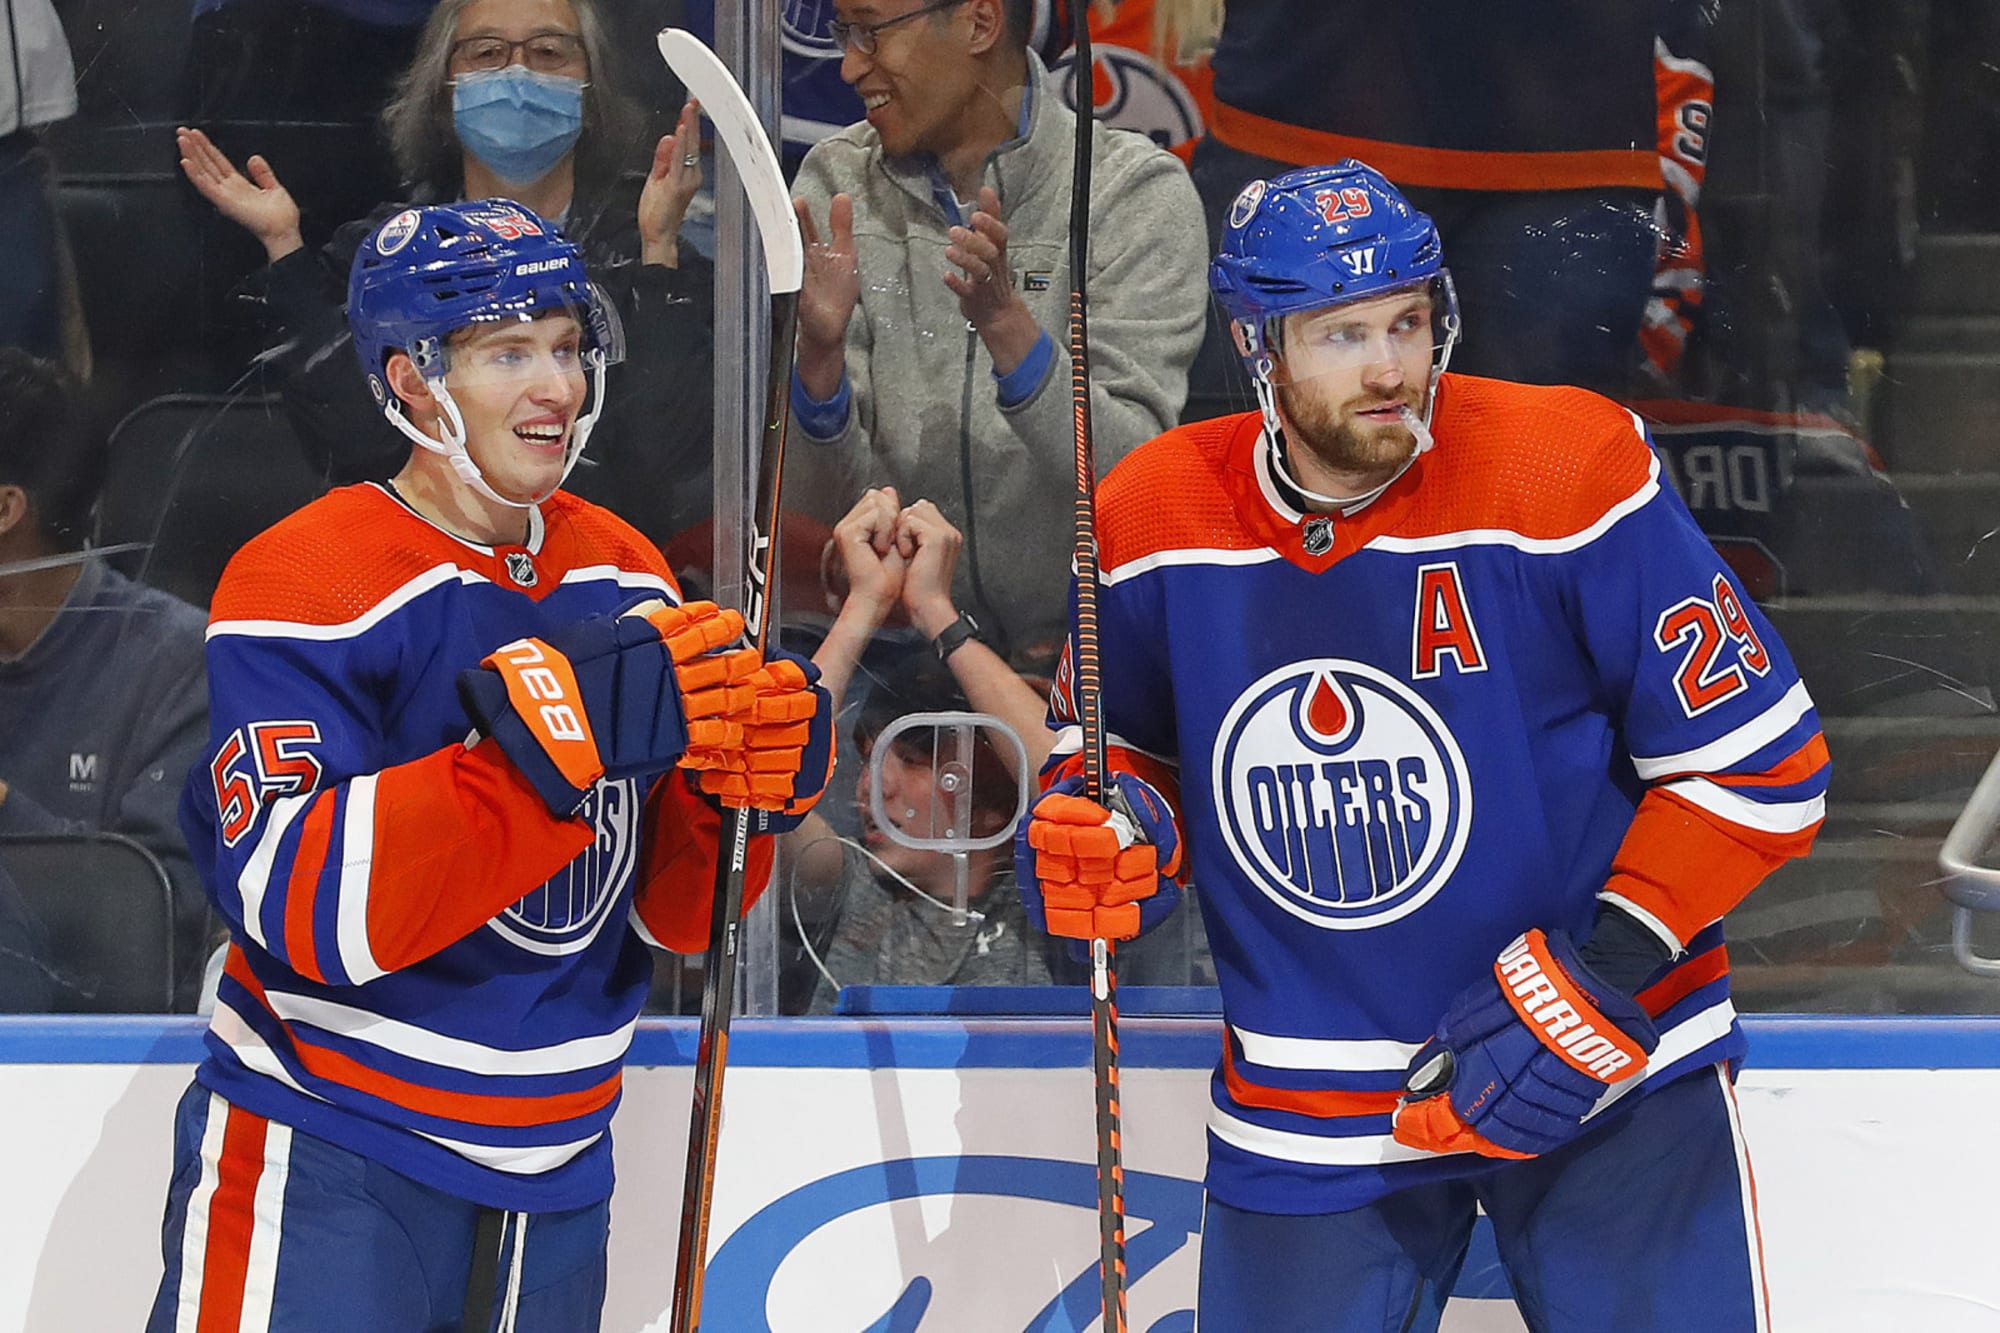 oilers match today